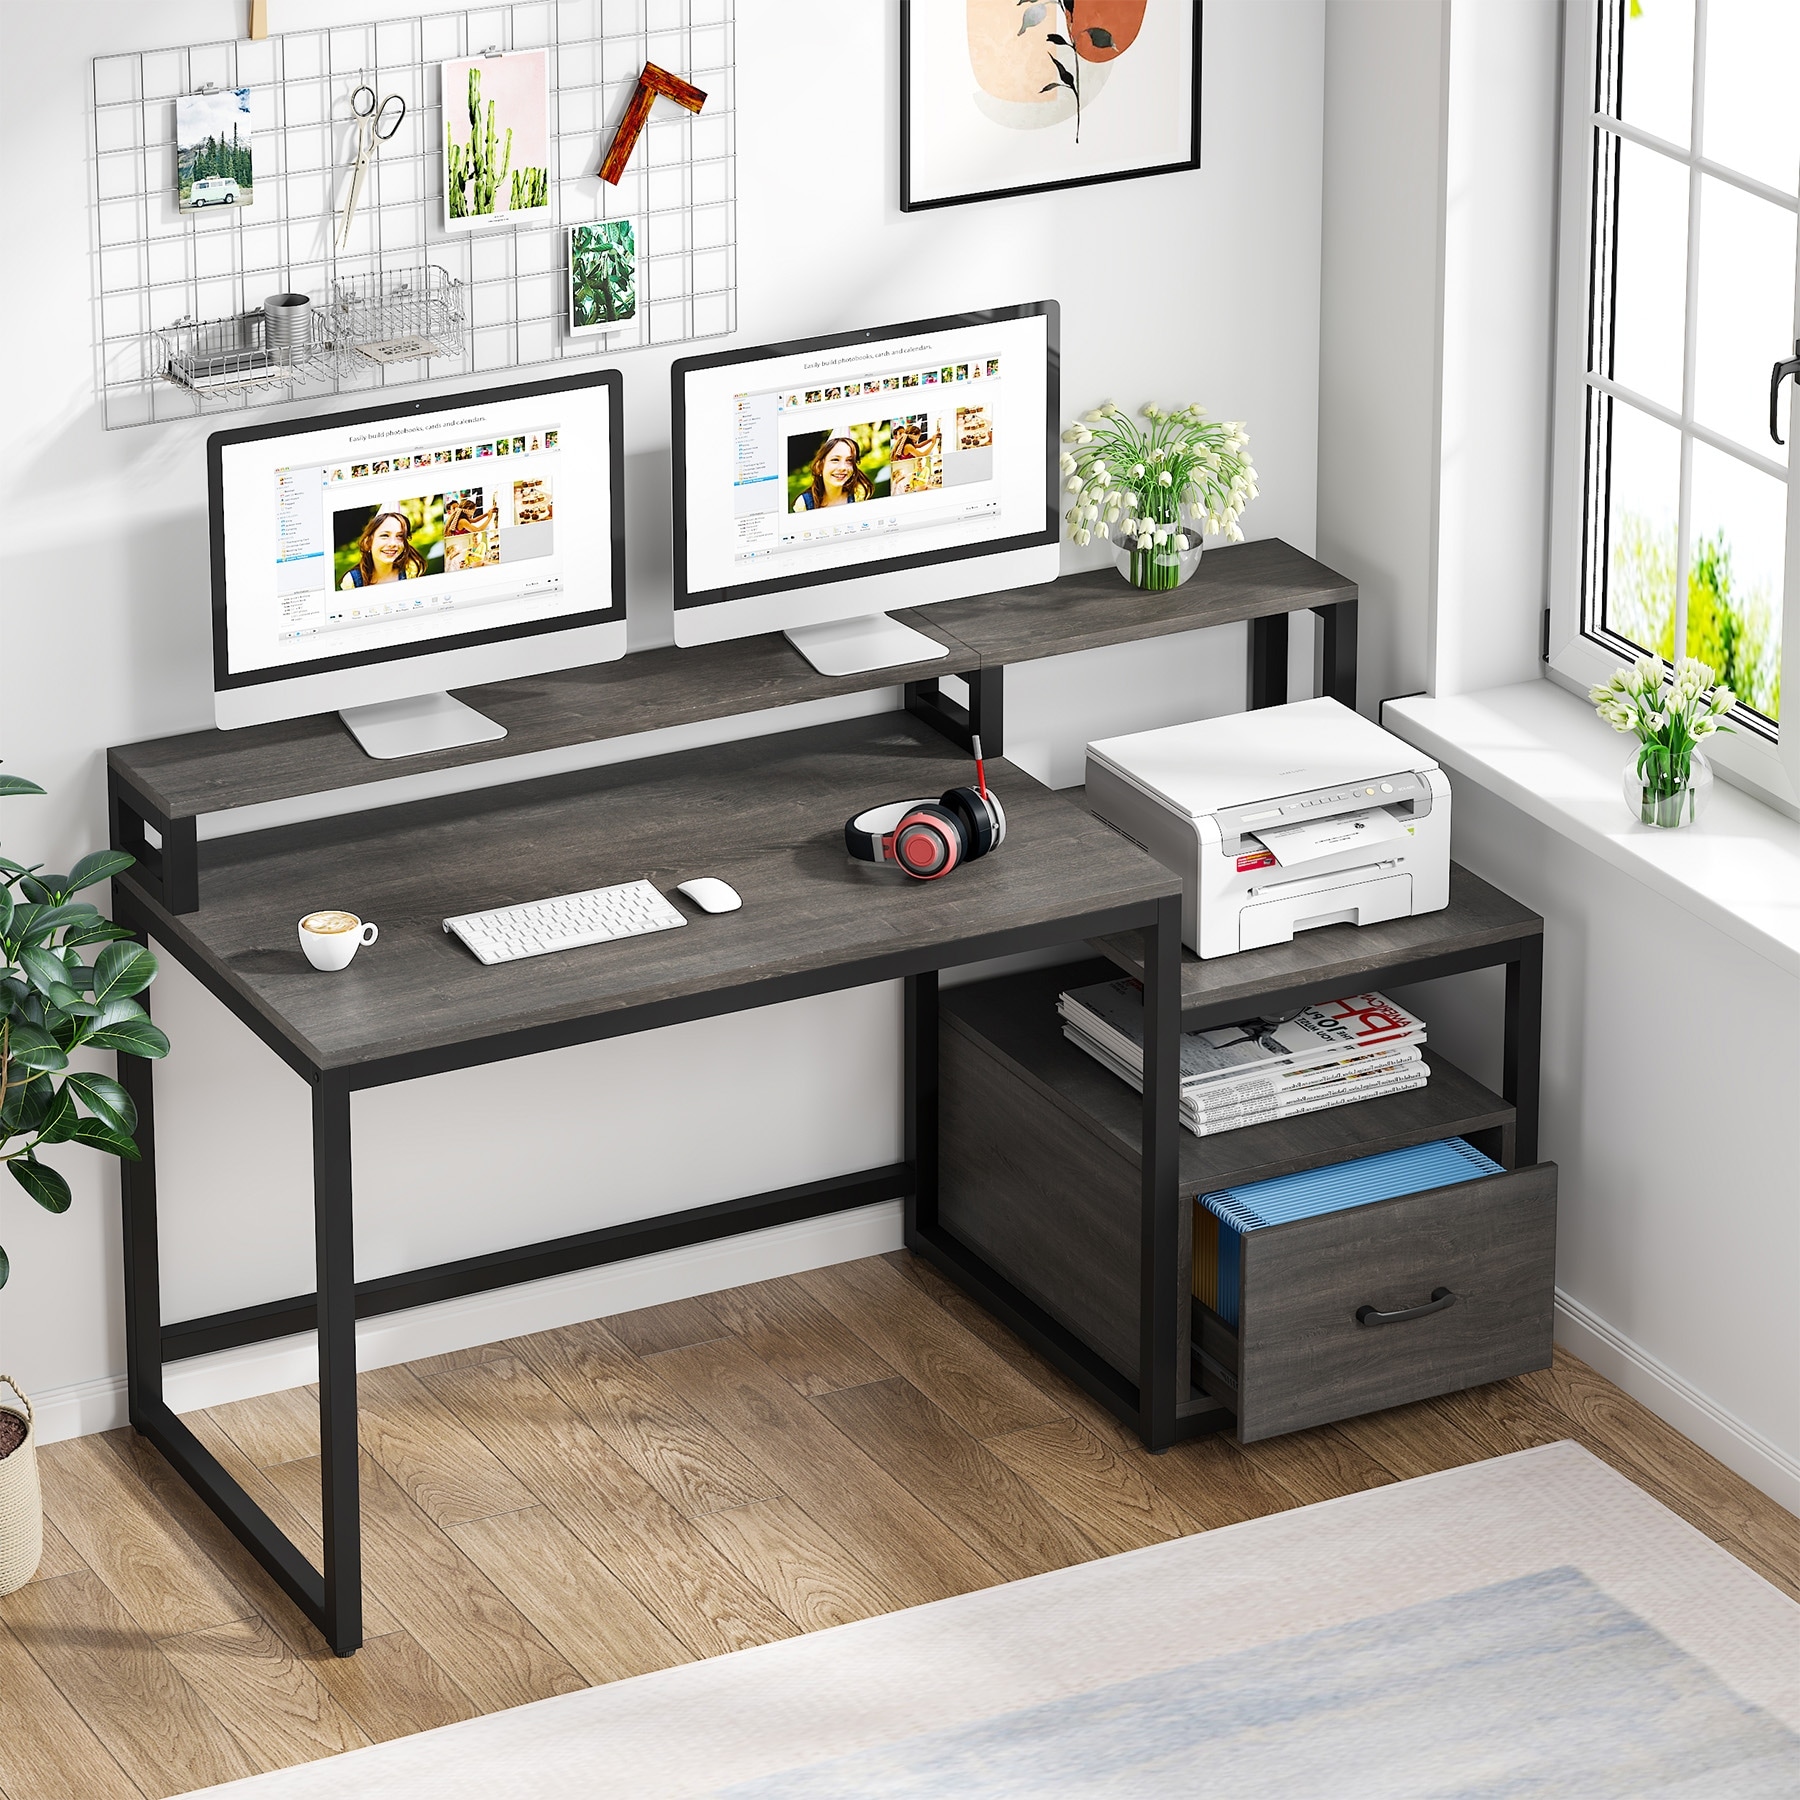 https://ak1.ostkcdn.com/images/products/is/images/direct/f3e2a88f201d7b9d9032ad34b4e20d864c77294e/Computer-Desk-with-File-Drawer-and-Storage-Shelves%2C-Industrial-Home-Office-Desk-with-Hutch.jpg